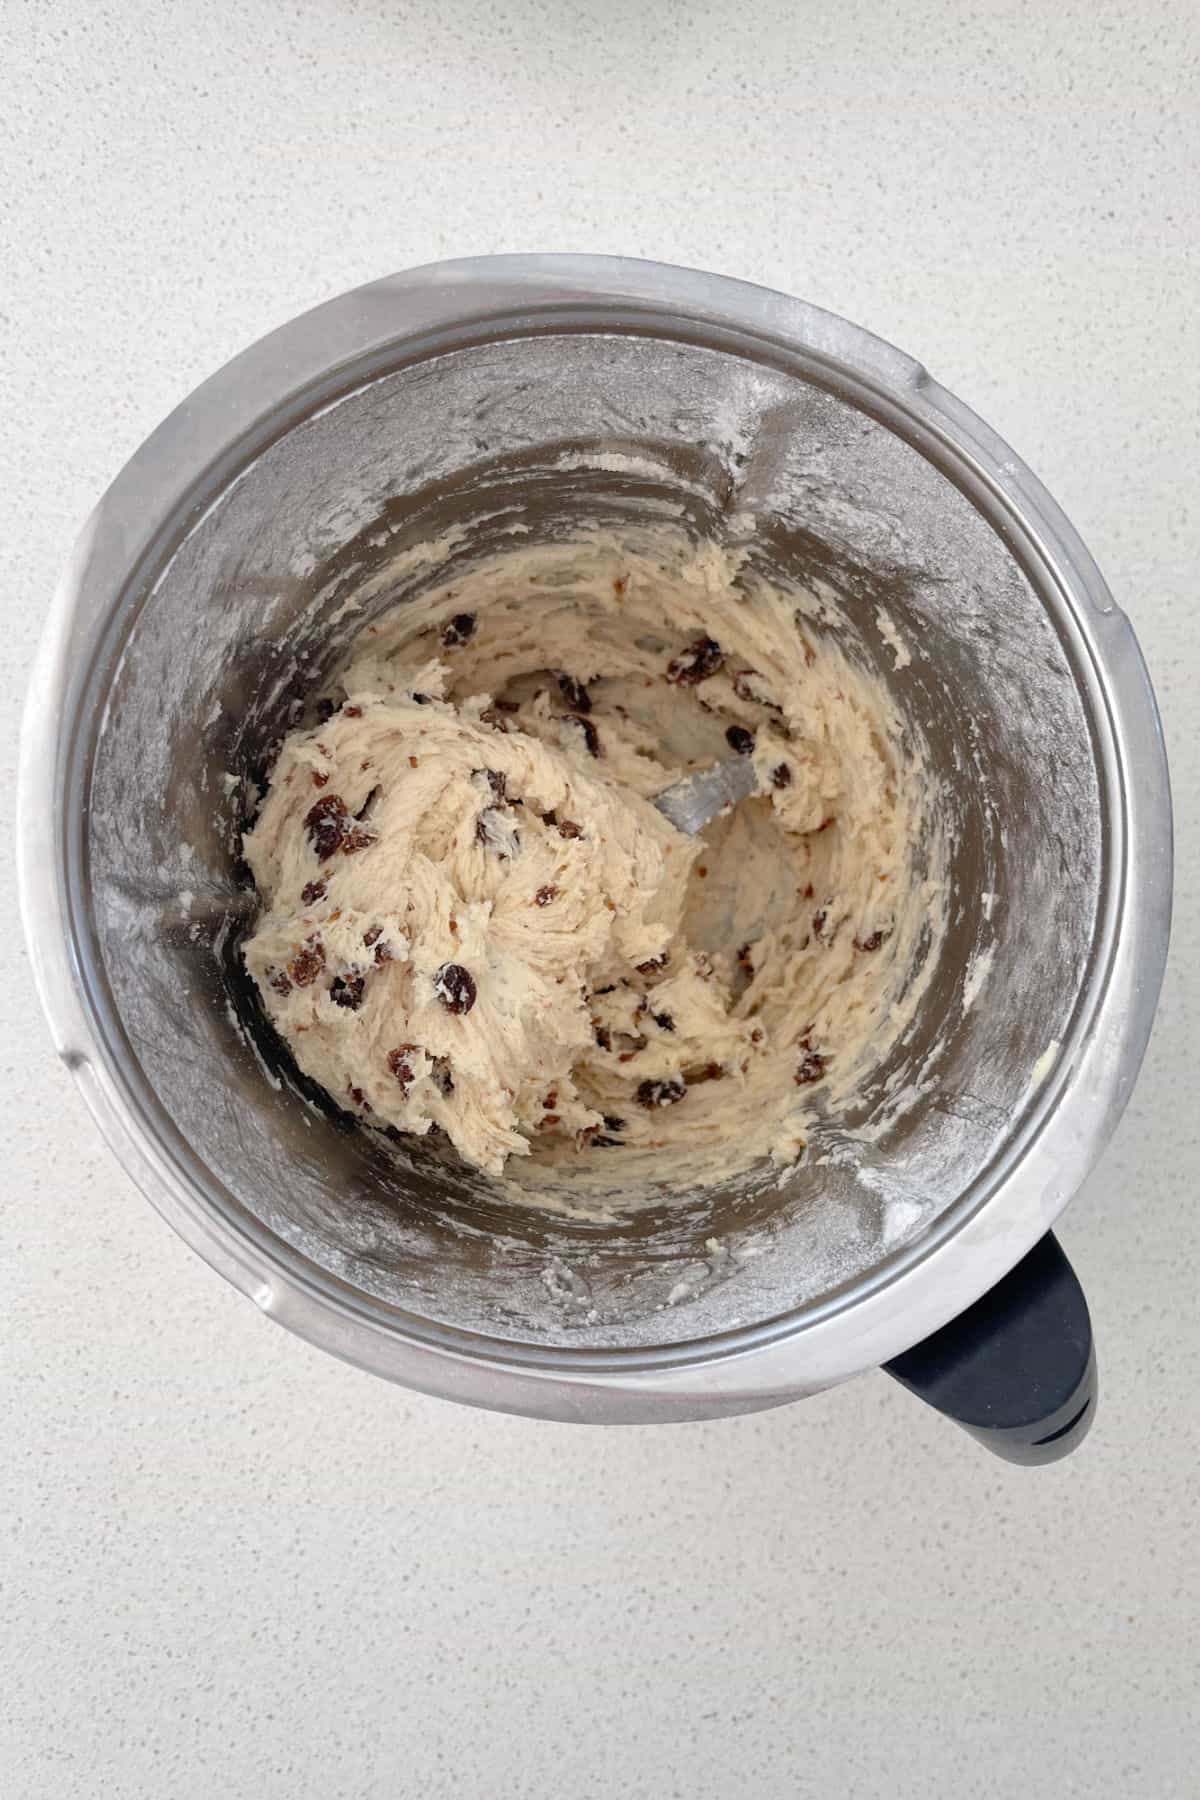 Sultana scone mixture after kneading in a thermomix bowl.